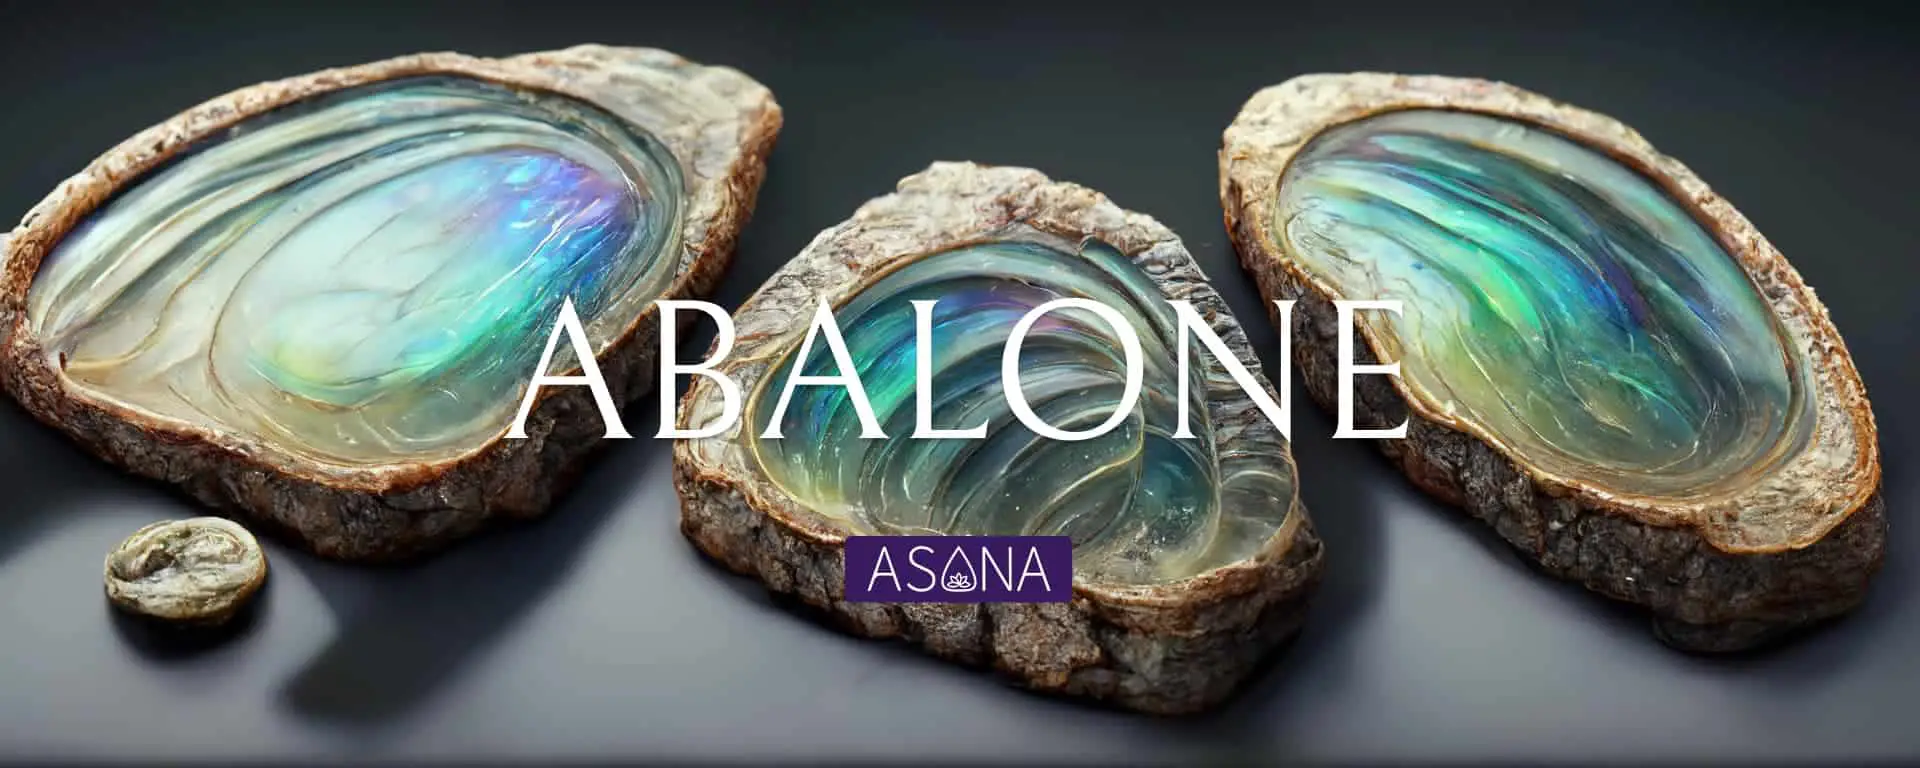 Uses Of Abalone Shell In Modern Times